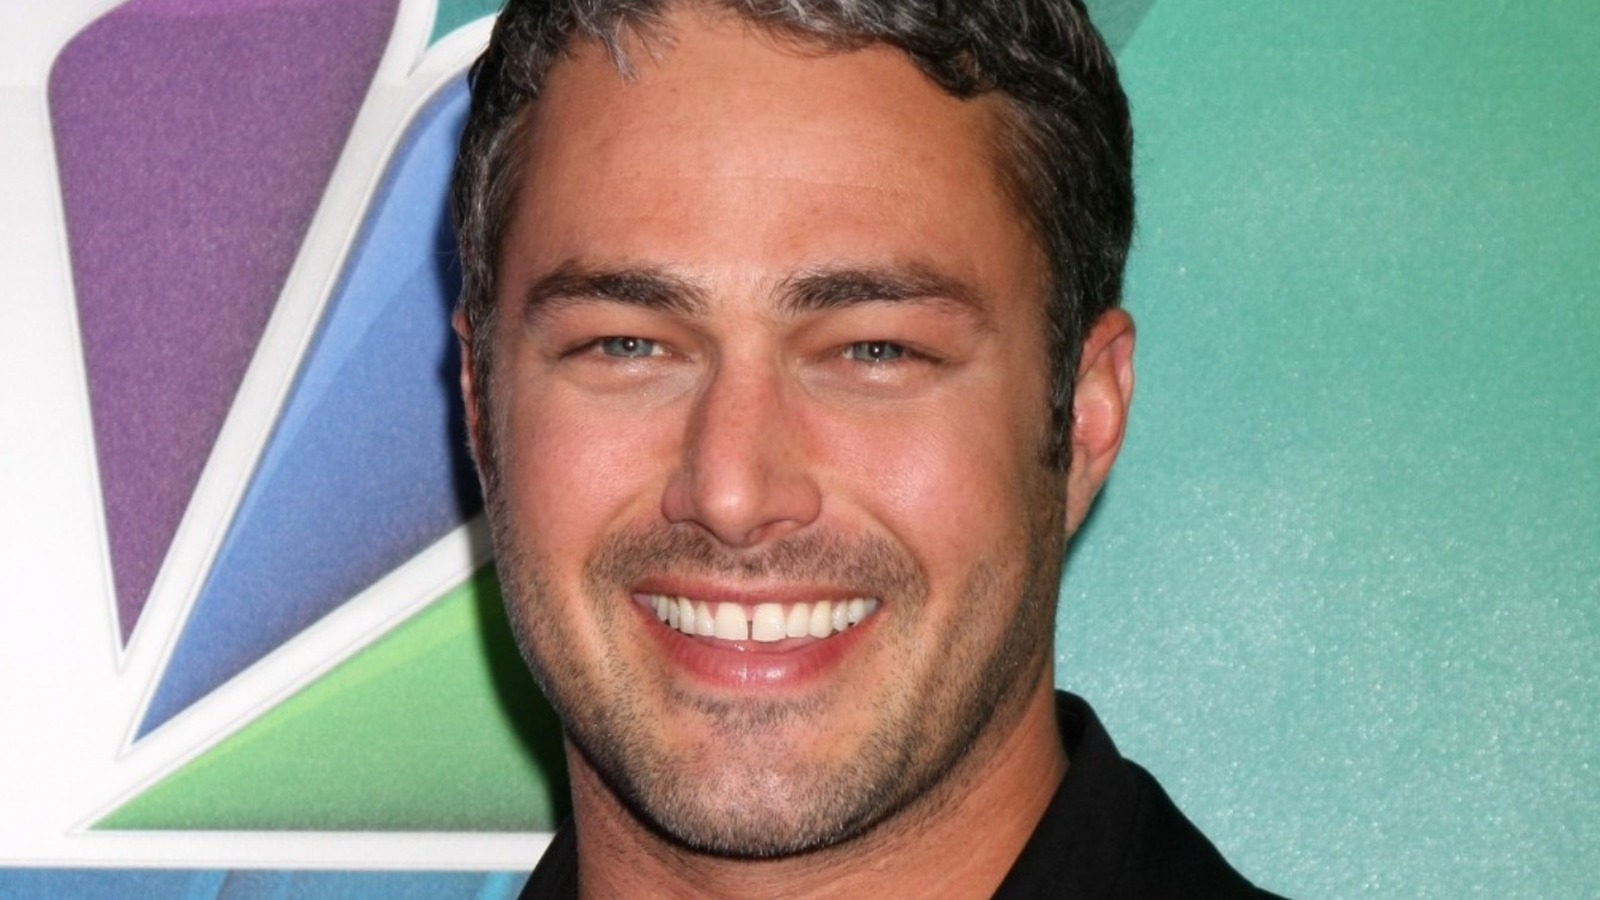 Taylor Kinney Fan Card: The Ultimate Guide to Designing, Printing, and Promoting